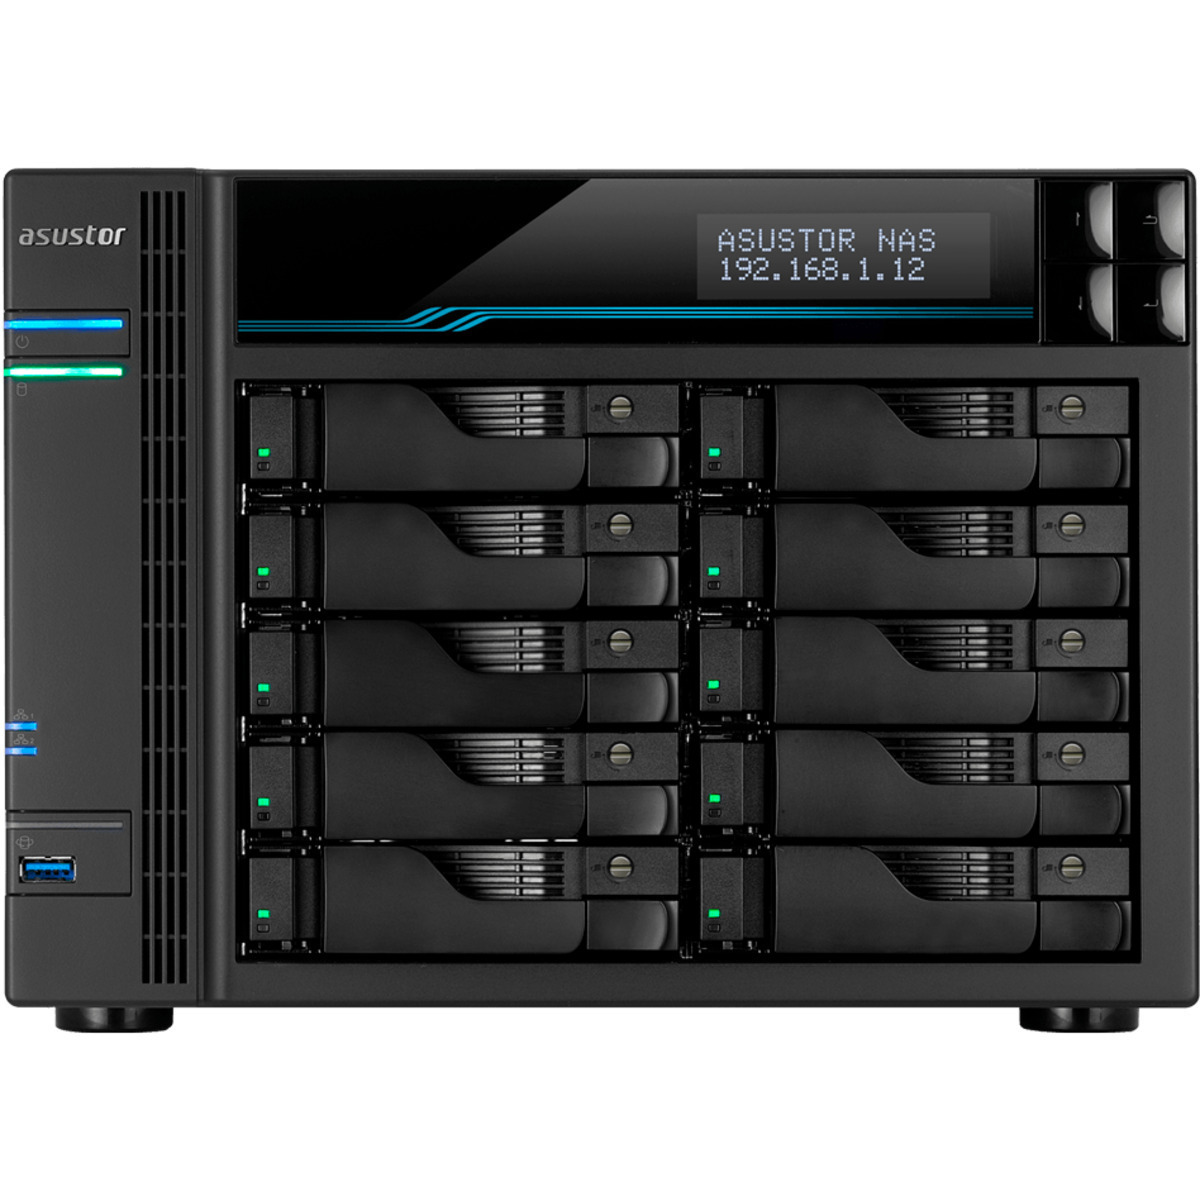 buy $3529 ASUSTOR AS7110T Lockerstor 10 Pro 20tb Desktop NAS - Network Attached Storage Device 10x2000gb Seagate BarraCuda ST2000DM008 3.5 7200rpm SATA 6Gb/s HDD CONSUMER Class Drives Installed - Burn-In Tested - ON SALE - nas headquarters buy network attached storage server device das new raid-5 free shipping usa christmas new year holiday sale AS7110T Lockerstor 10 Pro